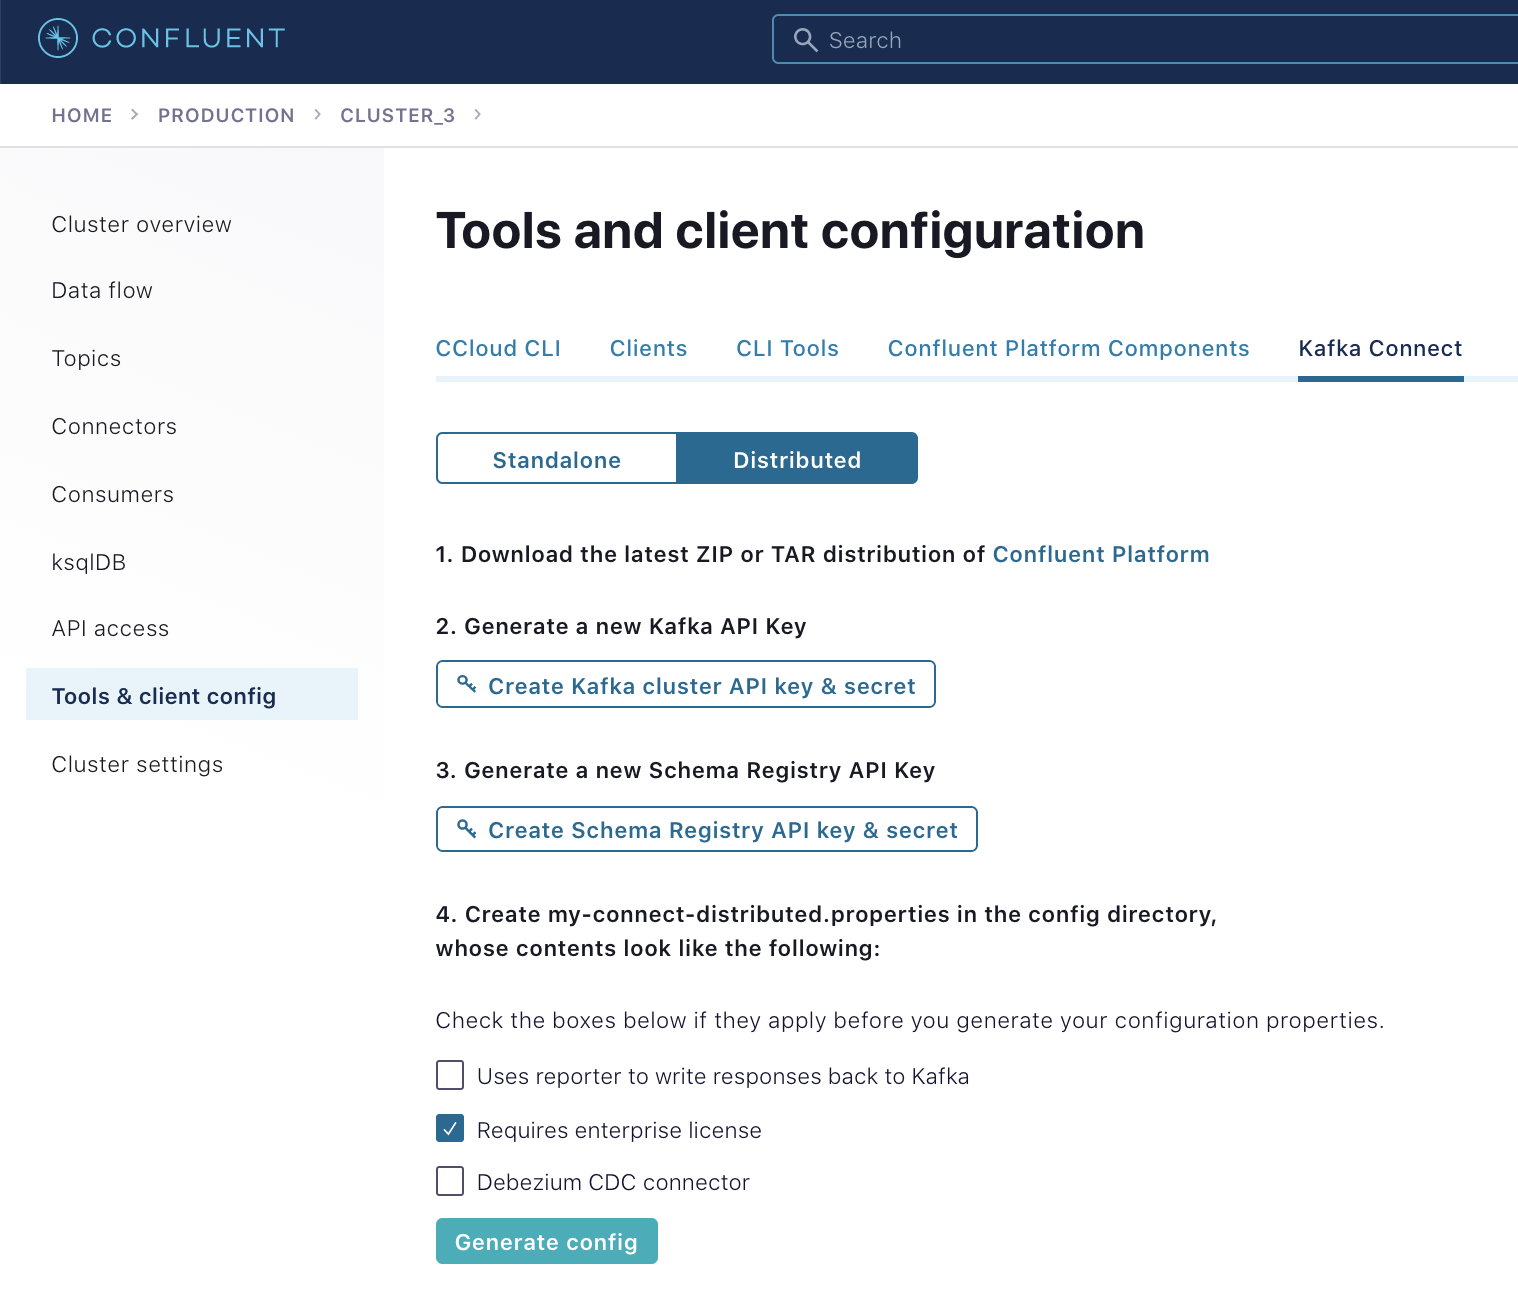 Tools and client configuration